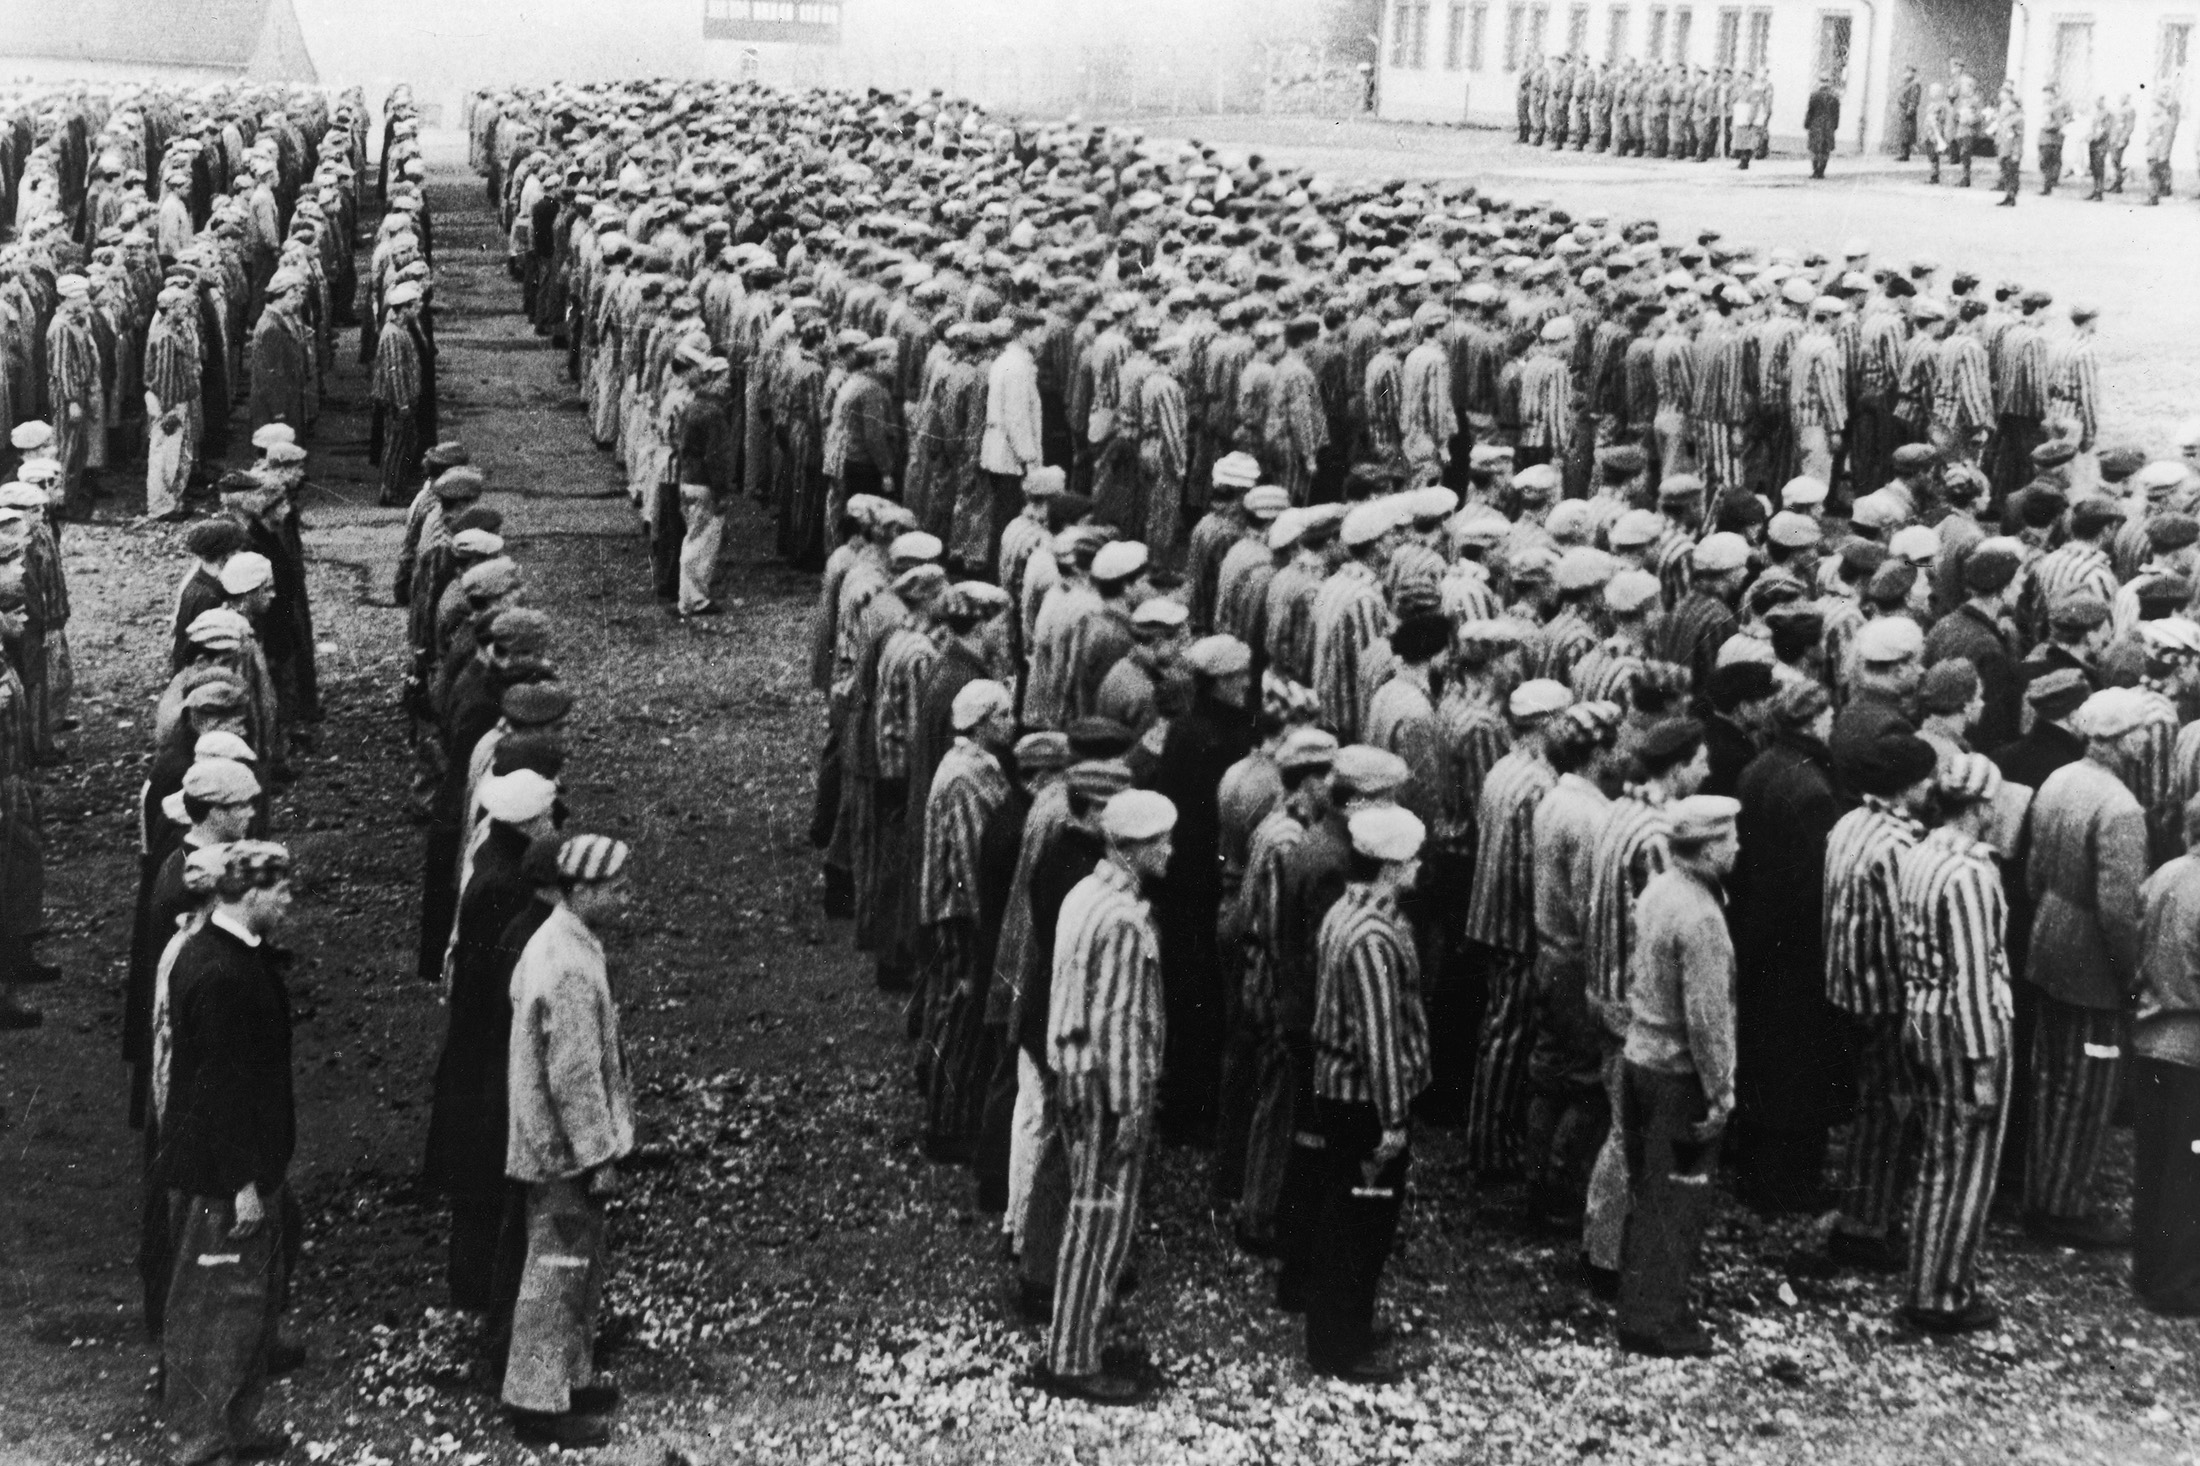 Prisoners stand before Nazi officers at the Buchenwald Concentration Camp,&nbsp; in Weimar, Germany, World War II, circa 1943.&nbsp;